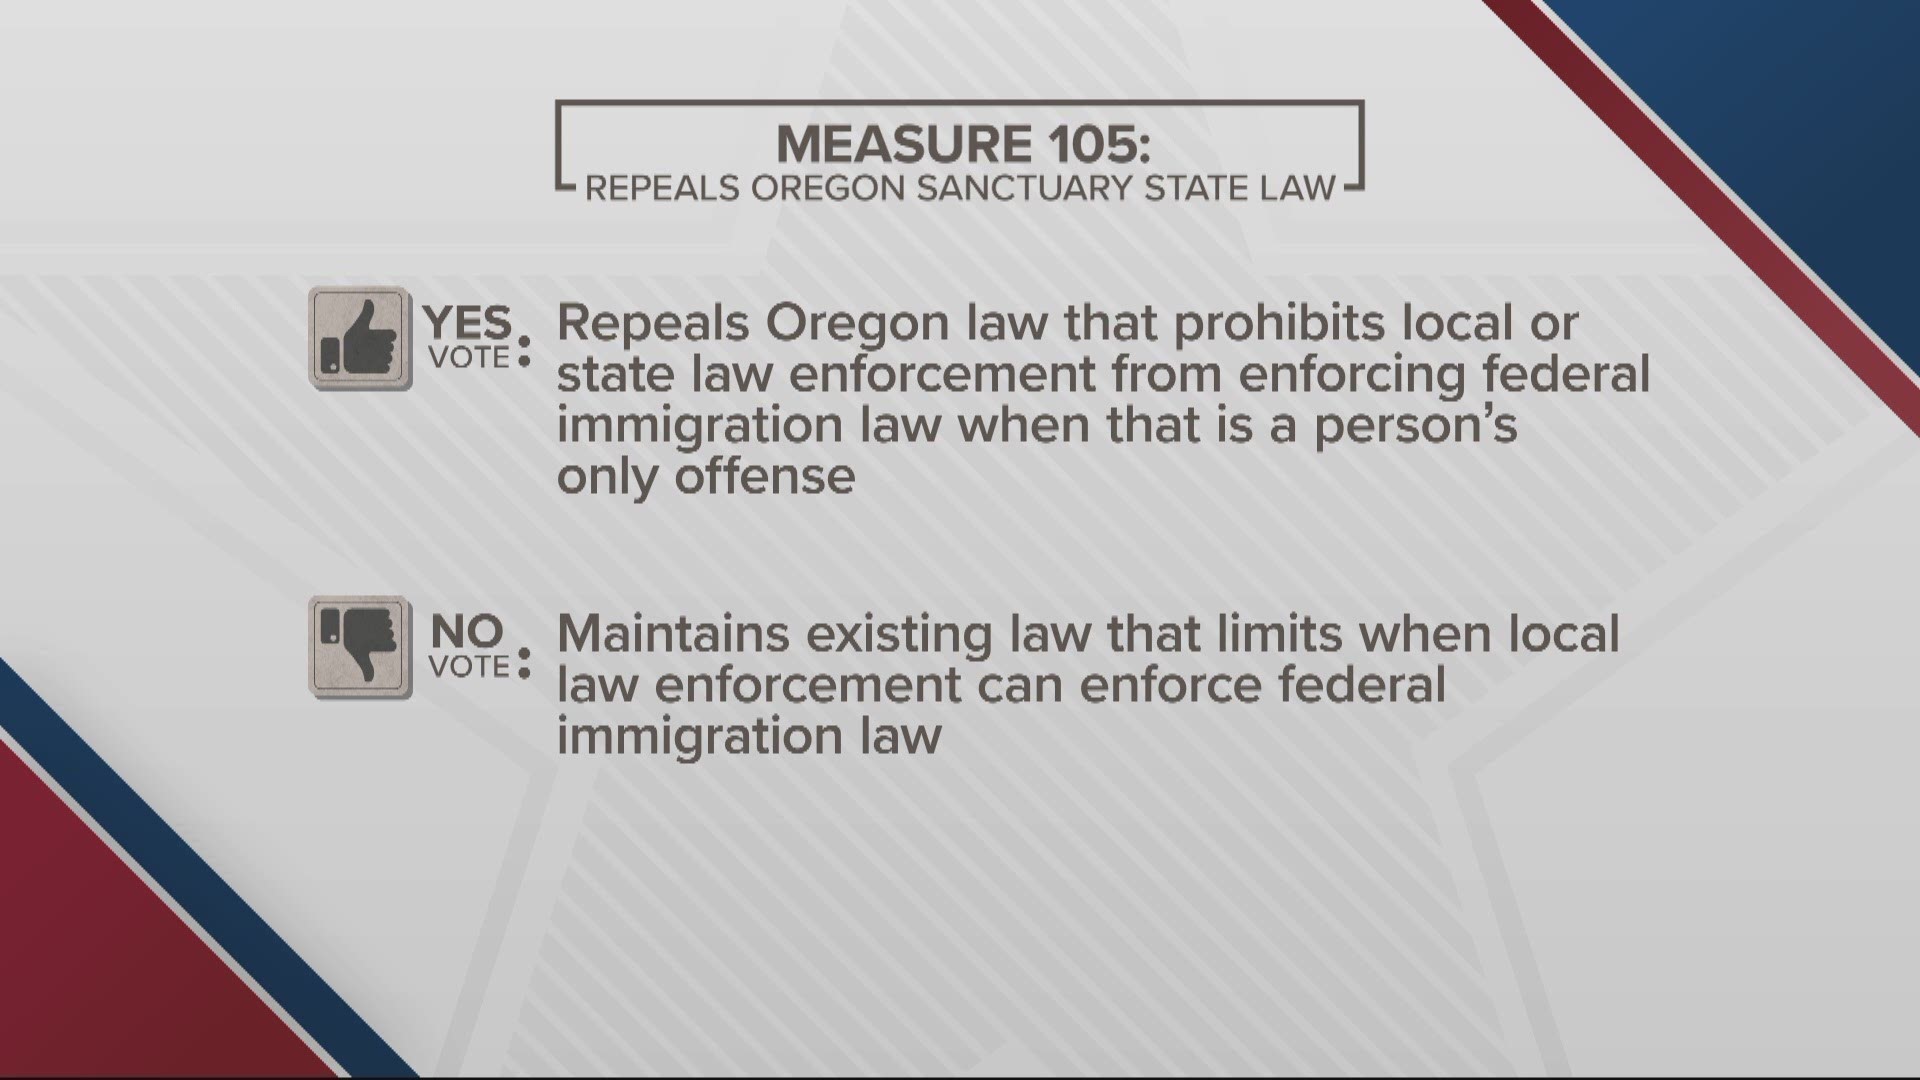 KGW political analyst Len Bergstein breaks down Oregon's Measure 105, which would repeal the state's sanctuary status.